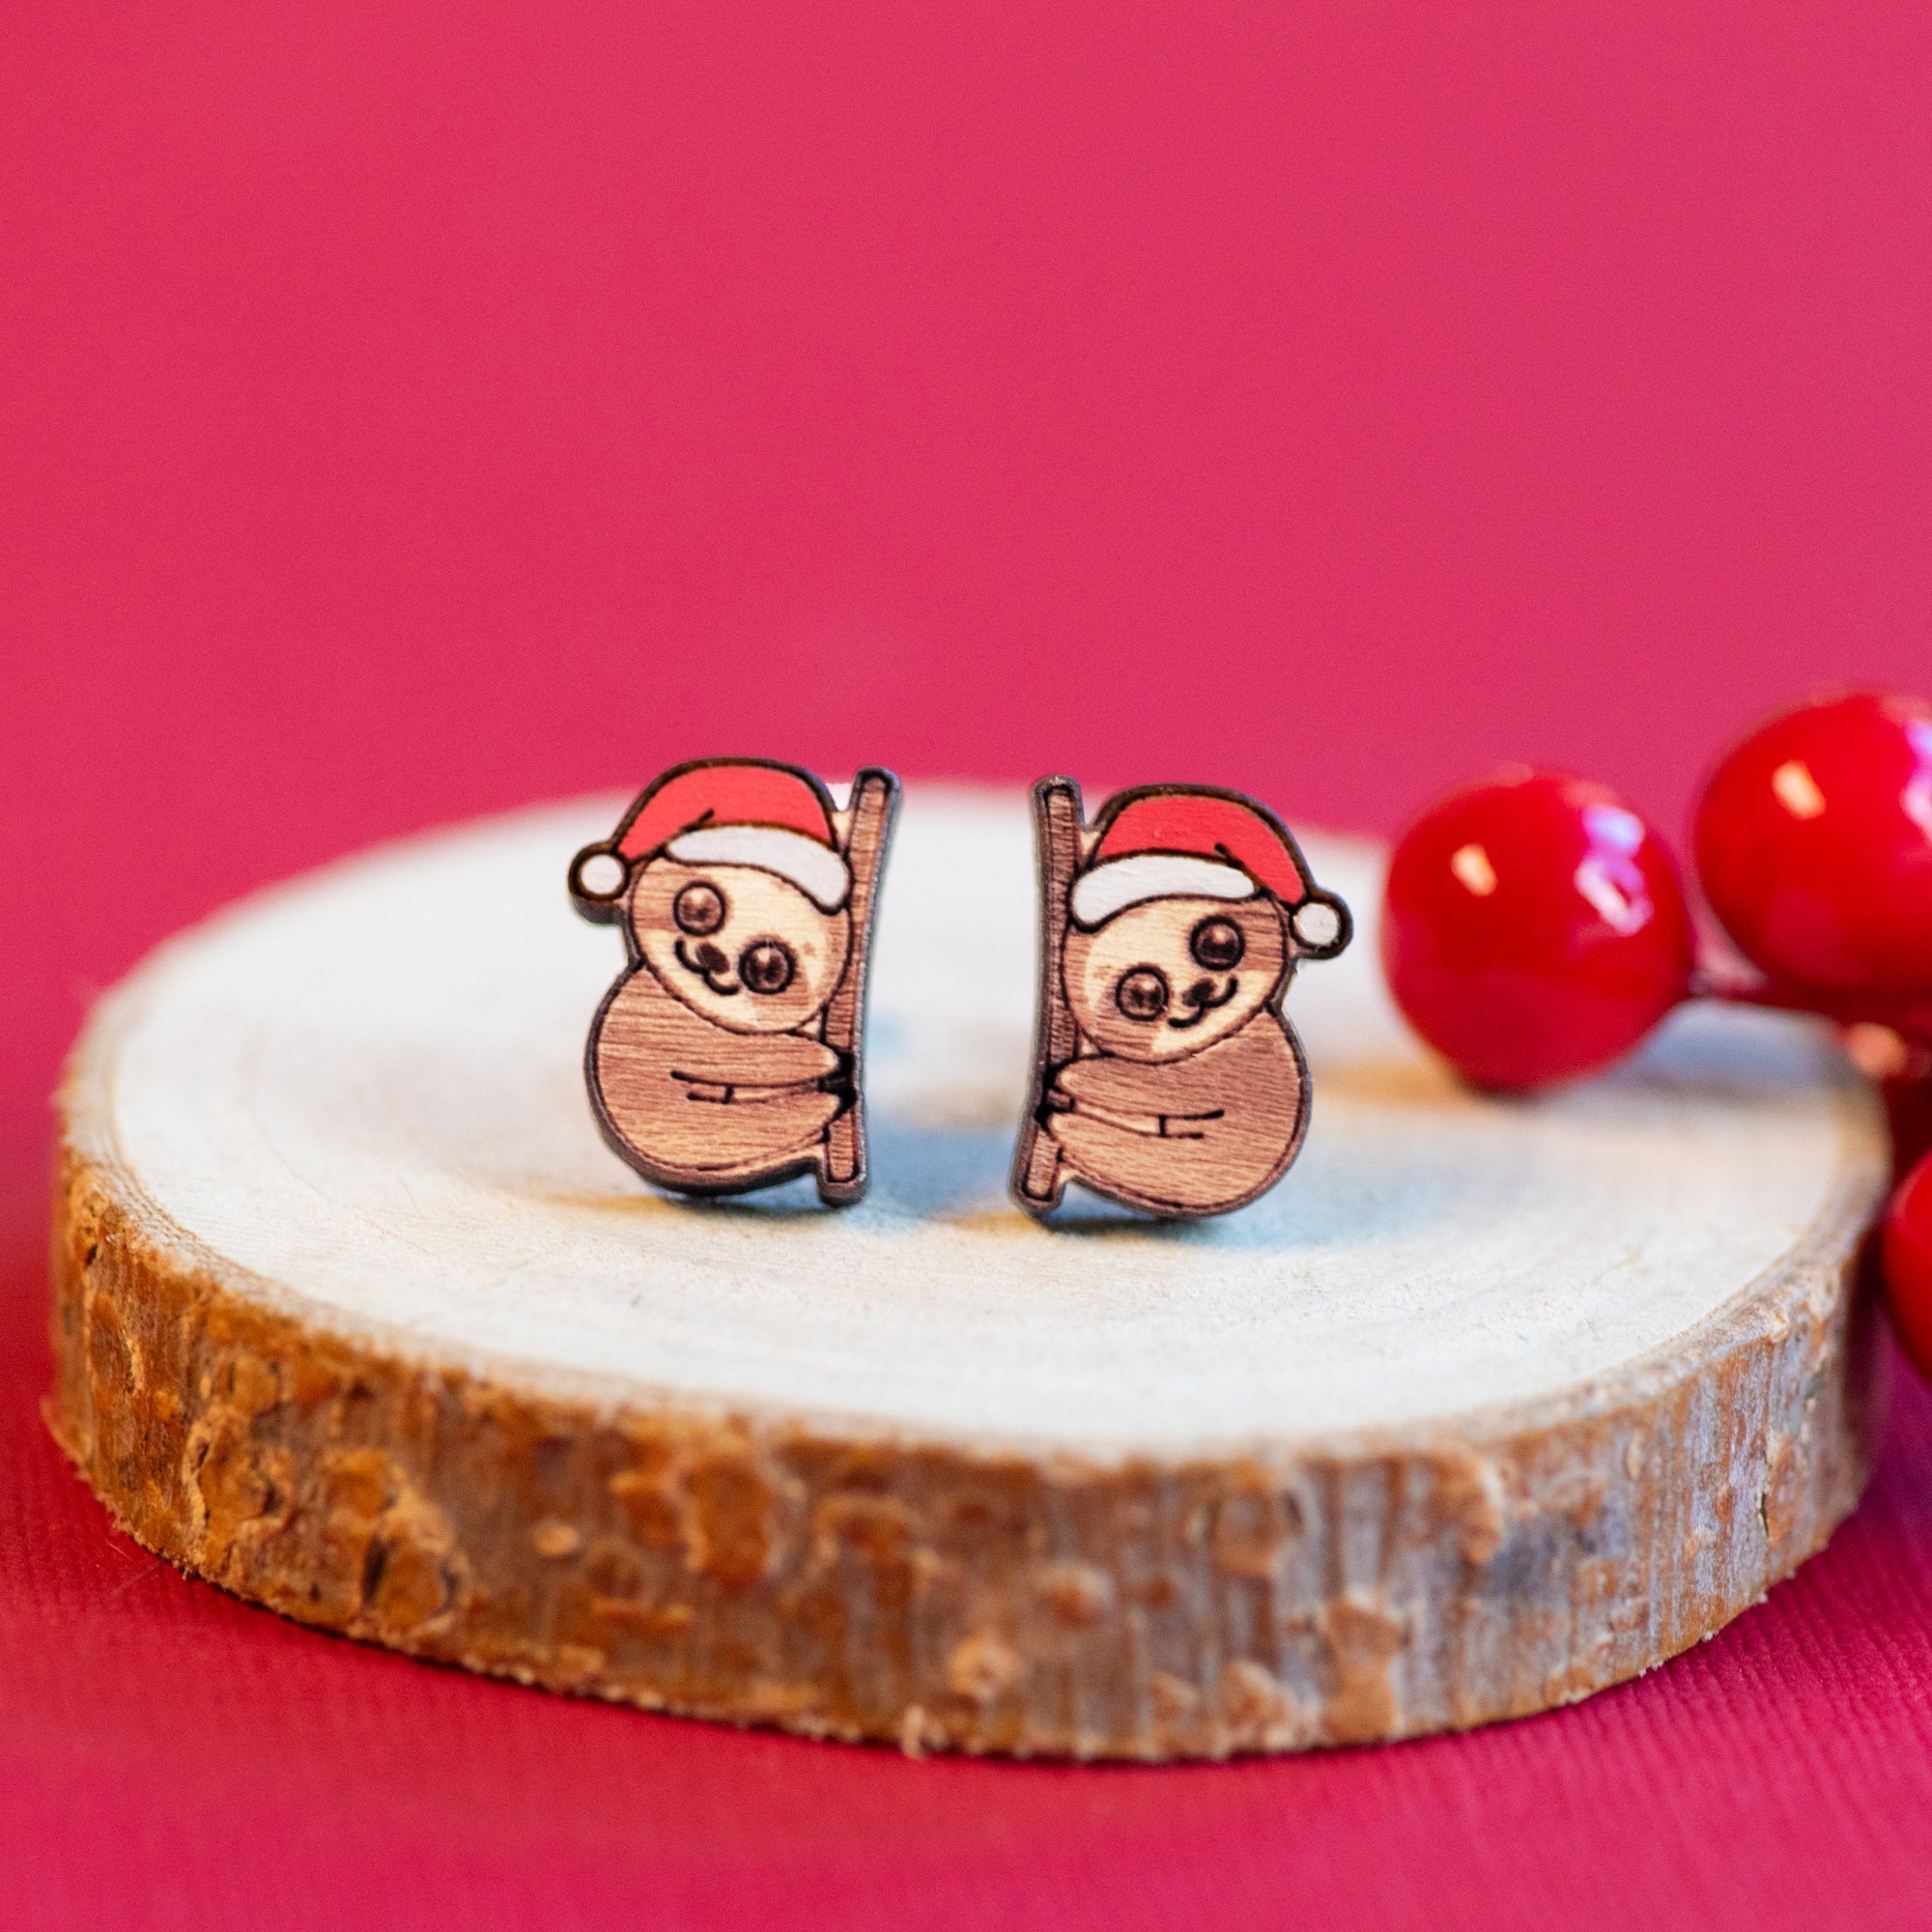 Hand-panted Baby Sloth with Santa Hat Wooden Earrings - PEL10264 - Robin Valley Official Store